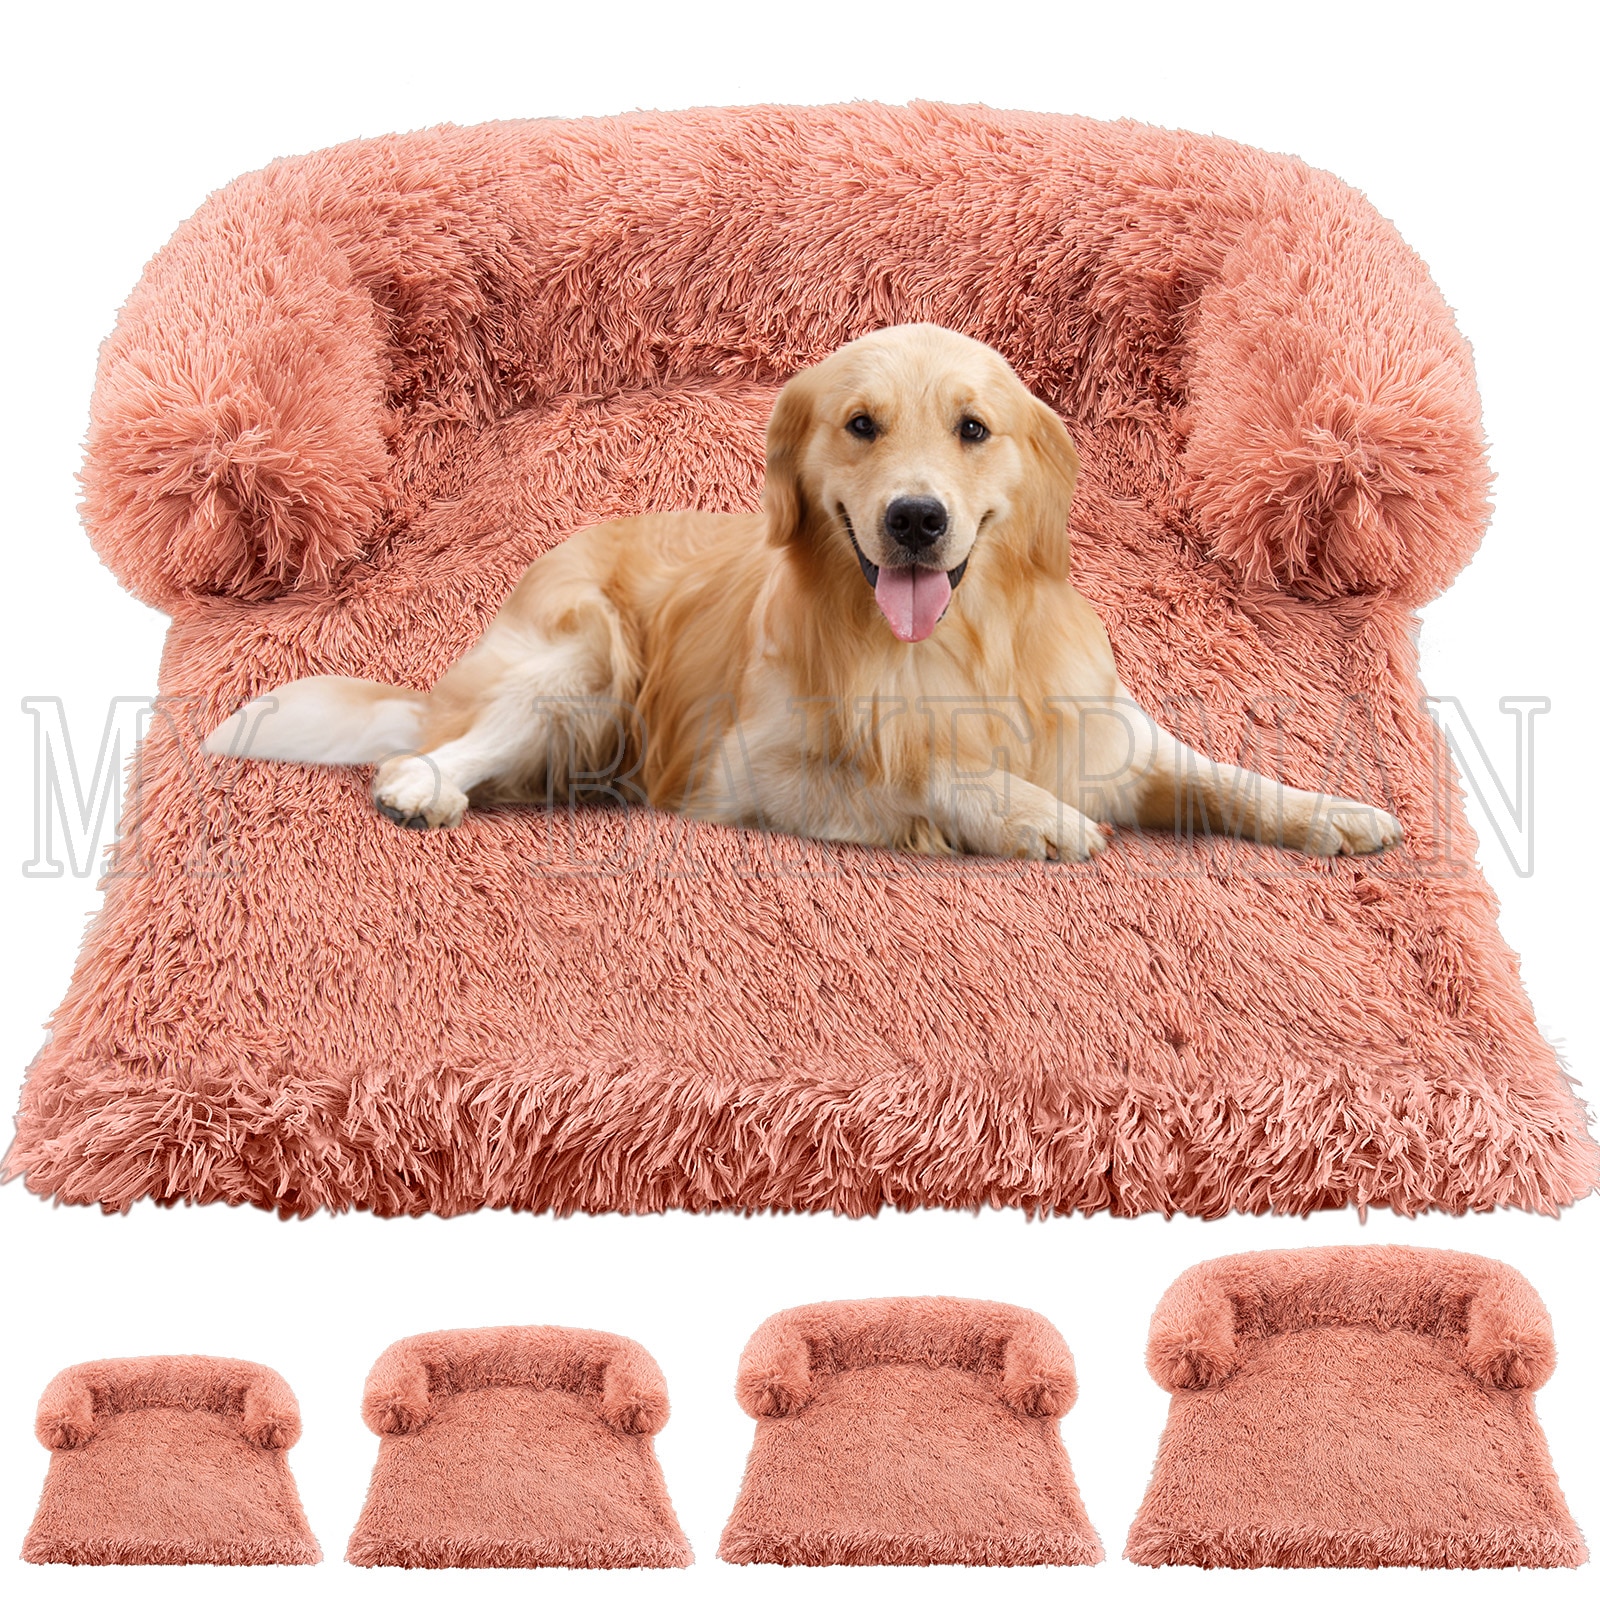 1373888240 1 - Large Plush Dog Sofa Bed Couch Protector - thepamperedpooch-co, pet-beds, dog-beds